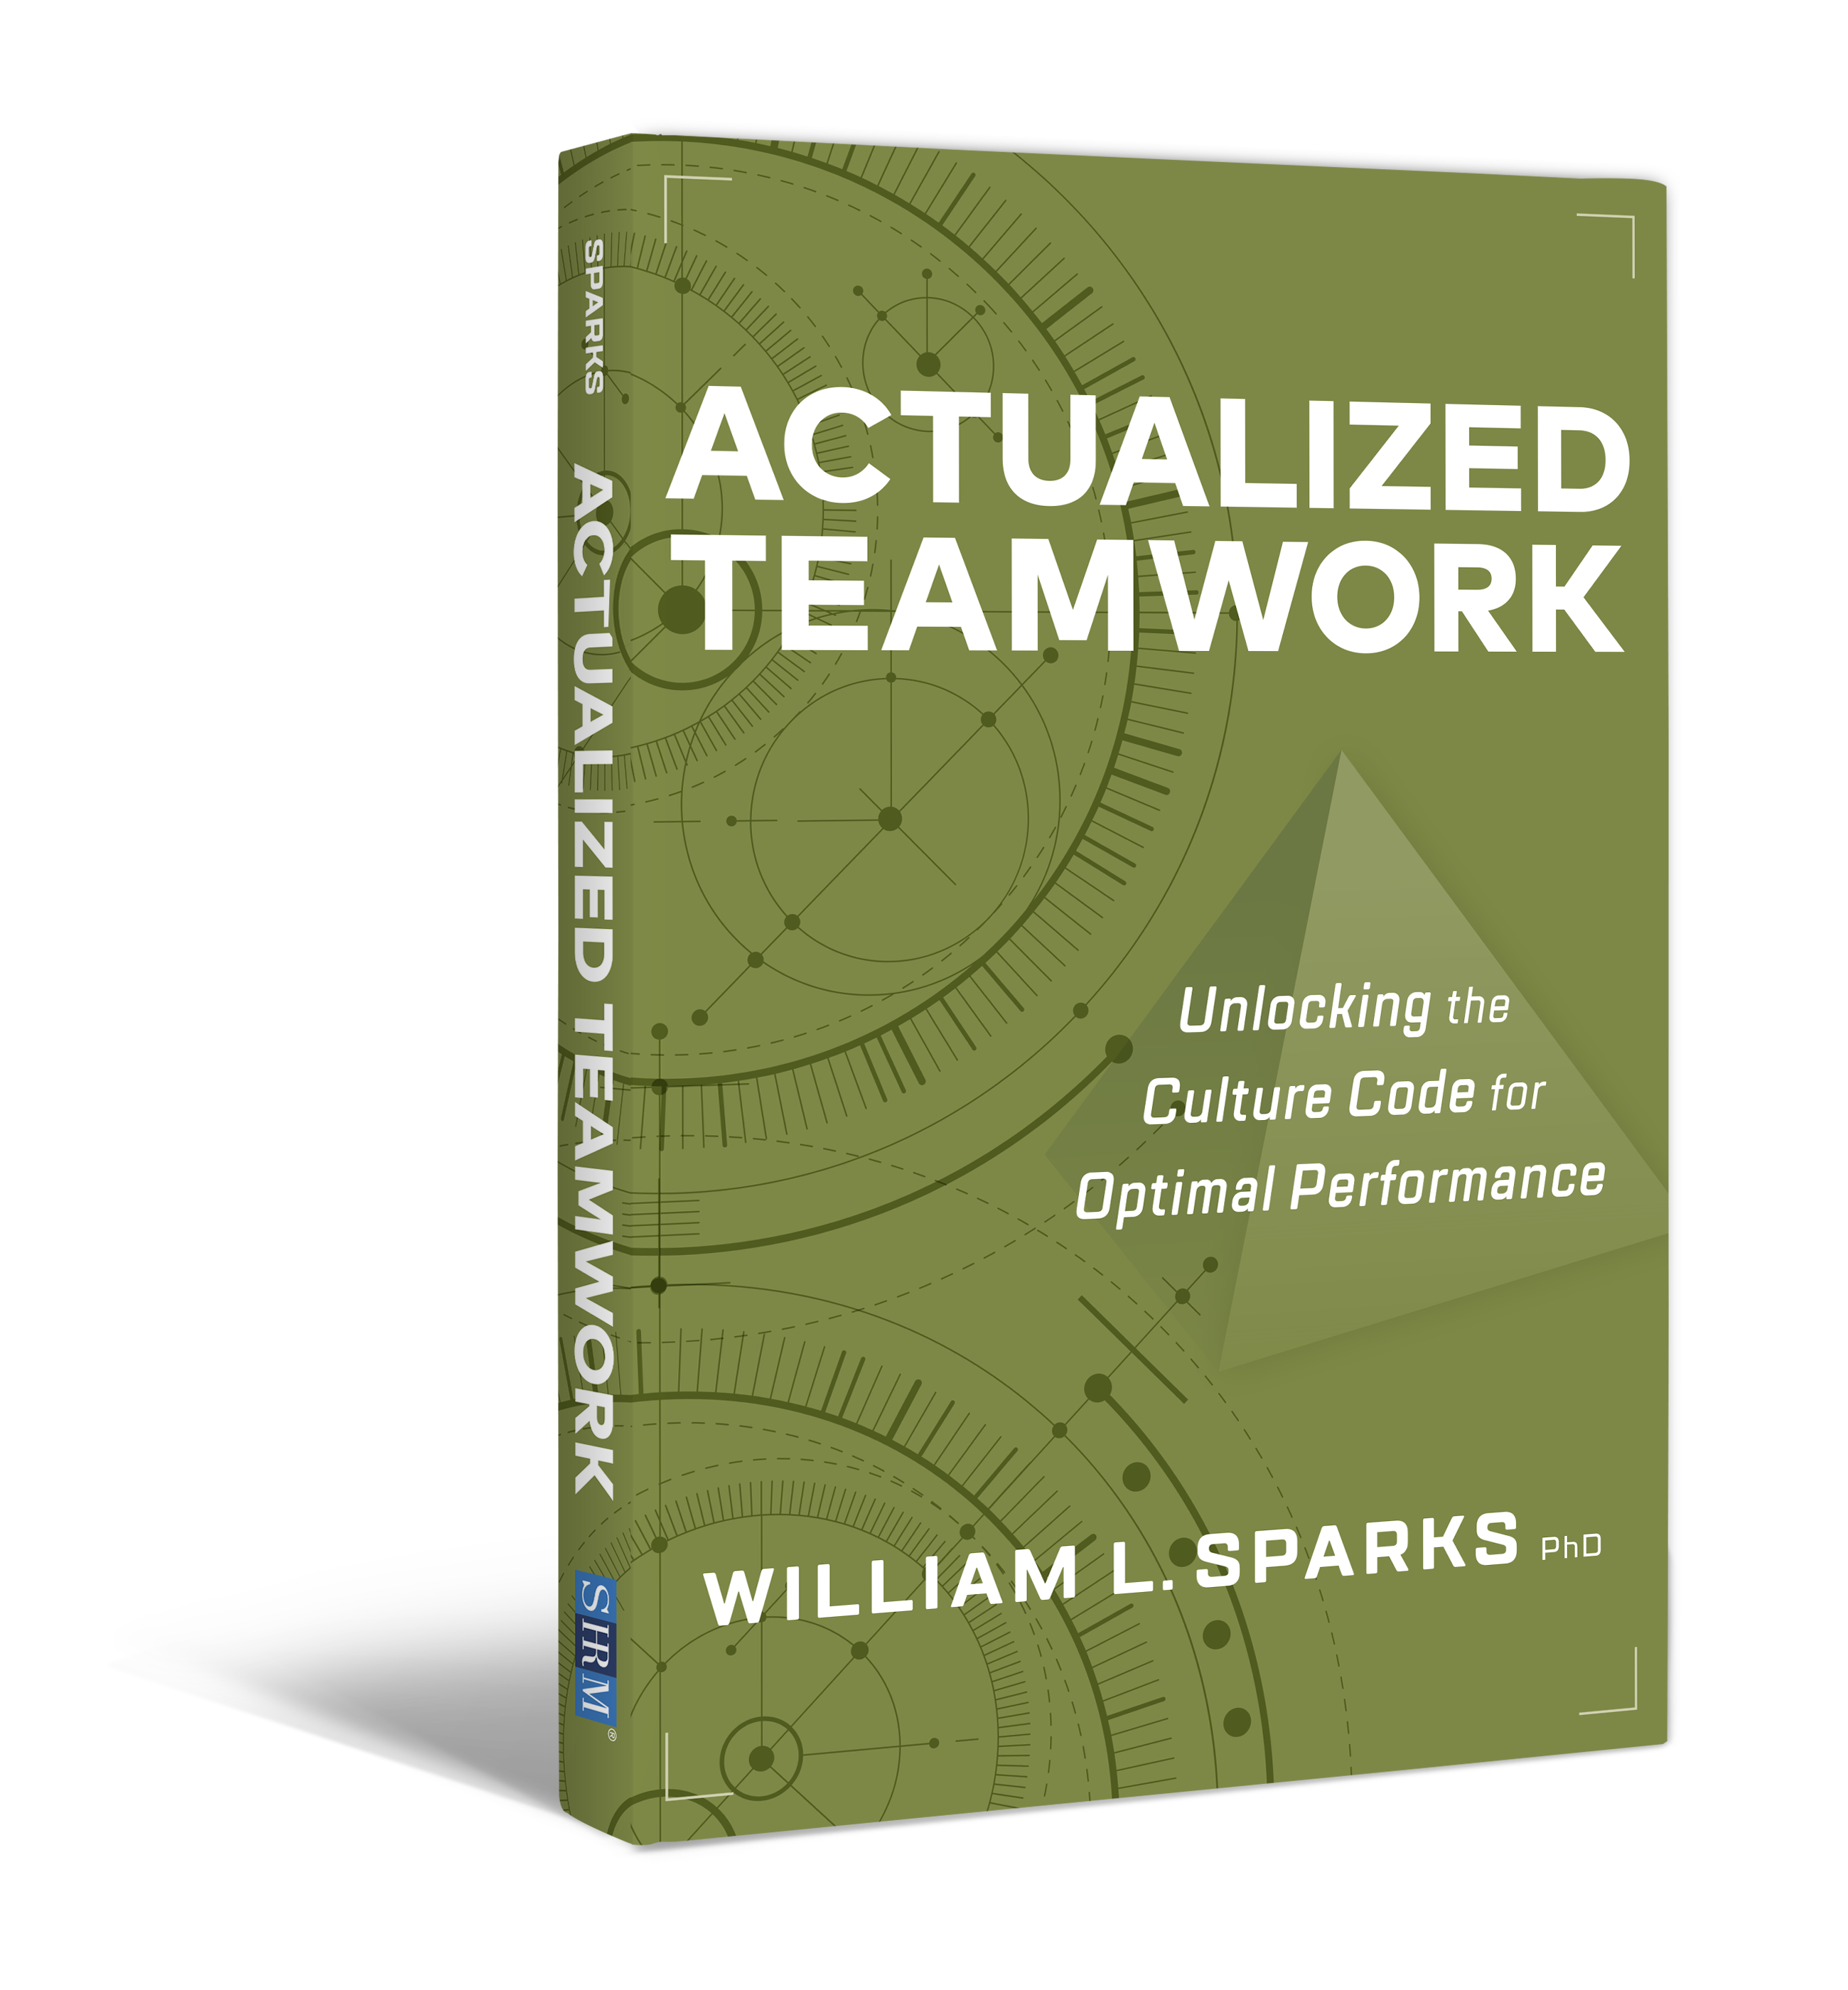 actualized teamwork book cover